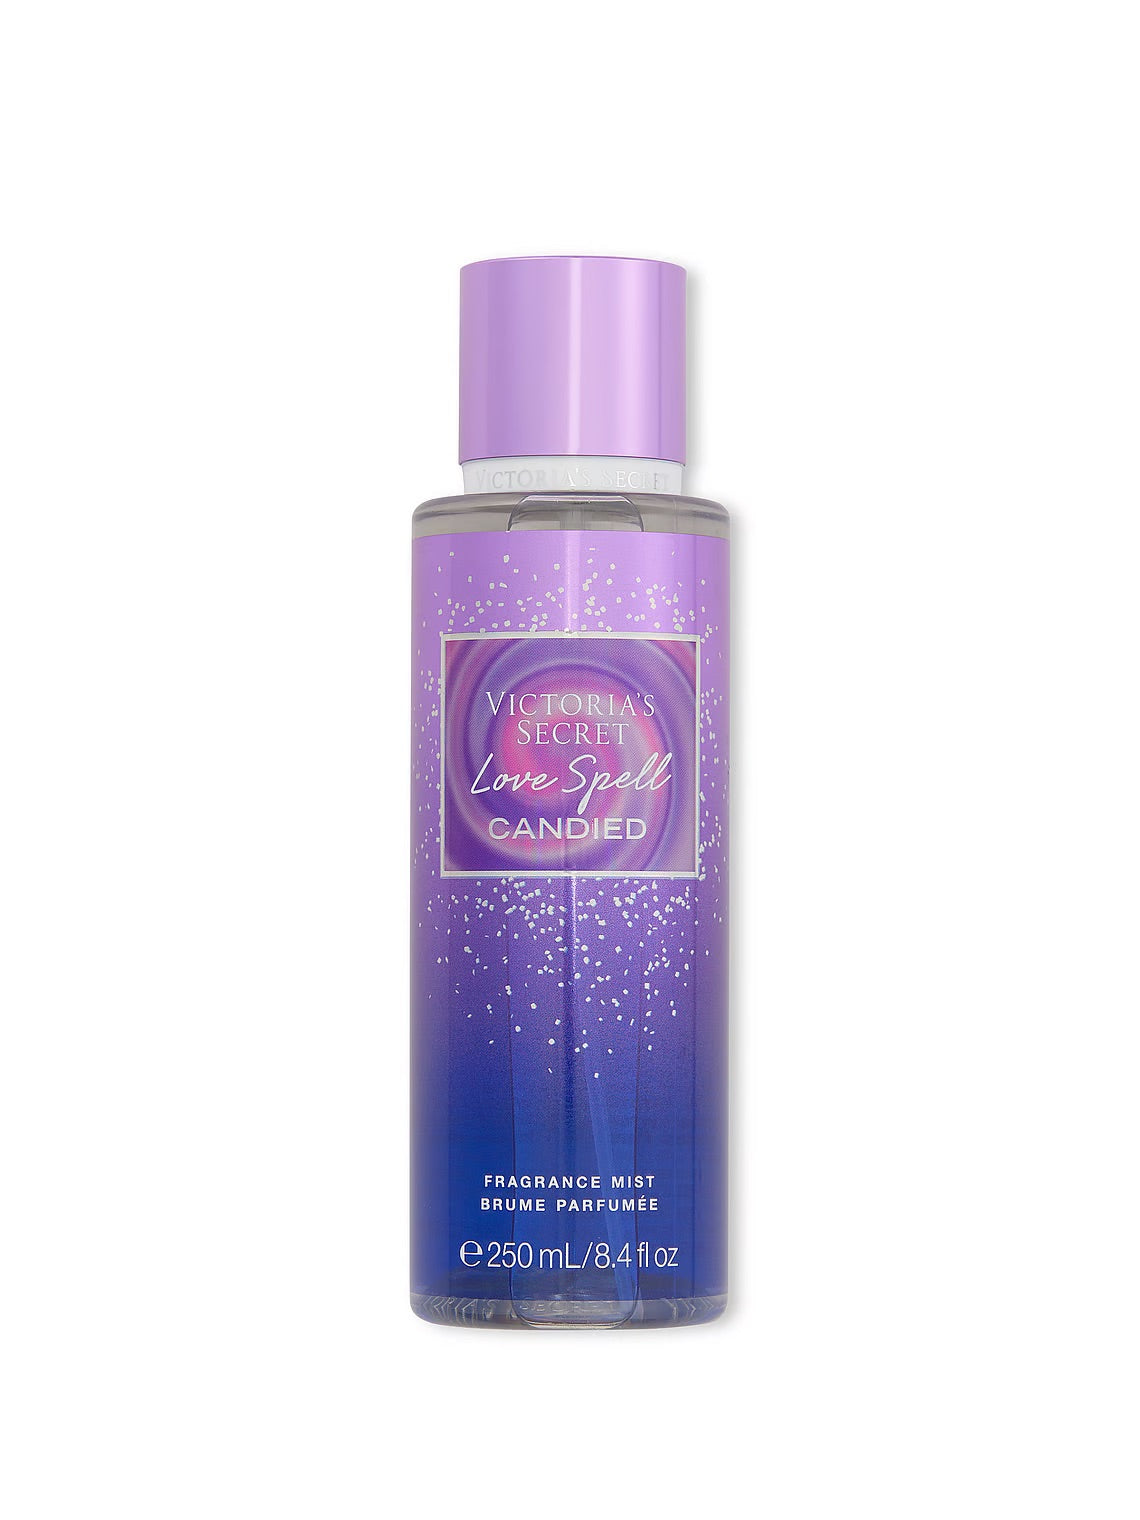 Candied Fragrance Mist-Love spell